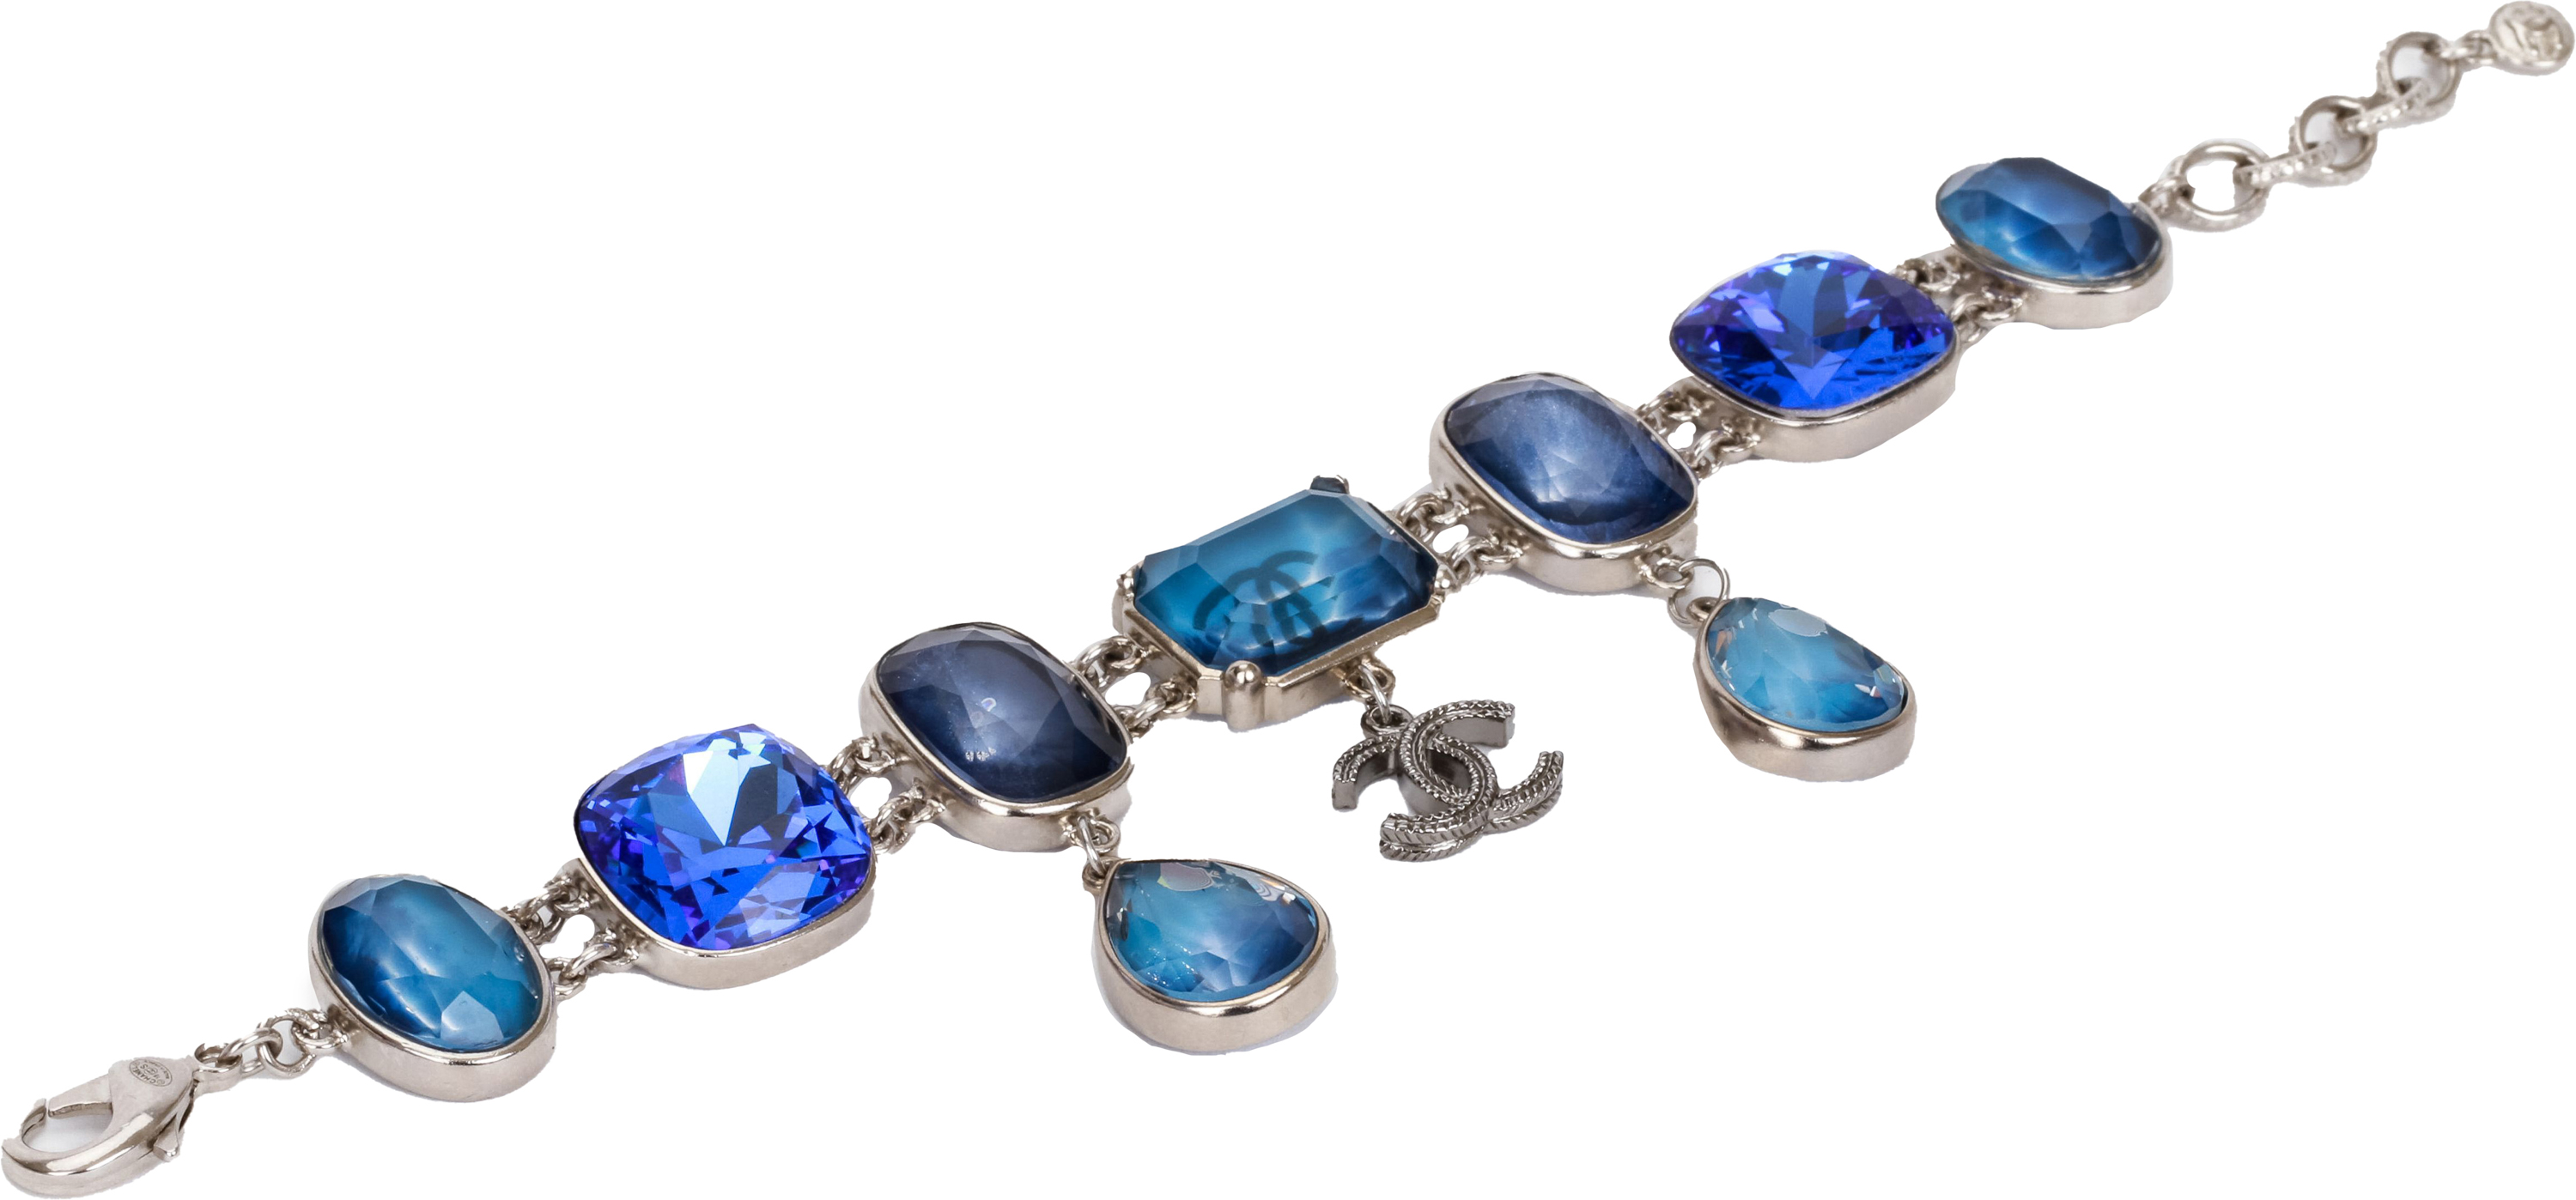 Chanel blue stones bracelet with charms~P77633486